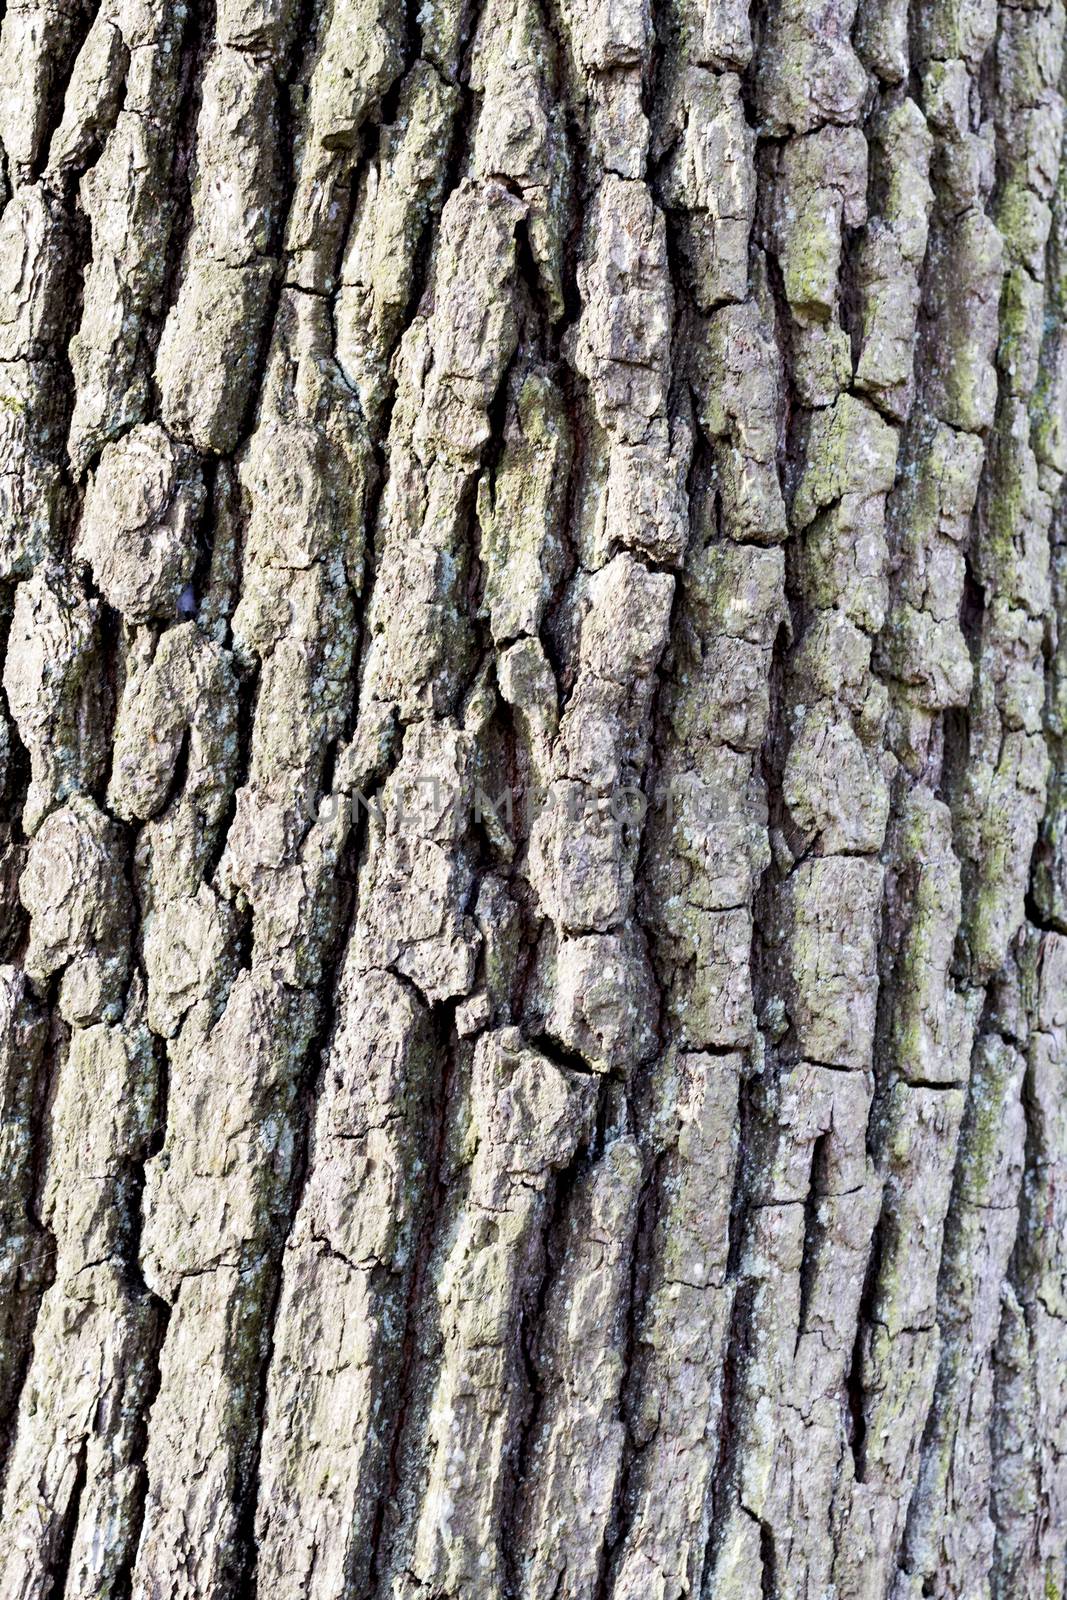 vertical image showing rough bark of tree in close-up